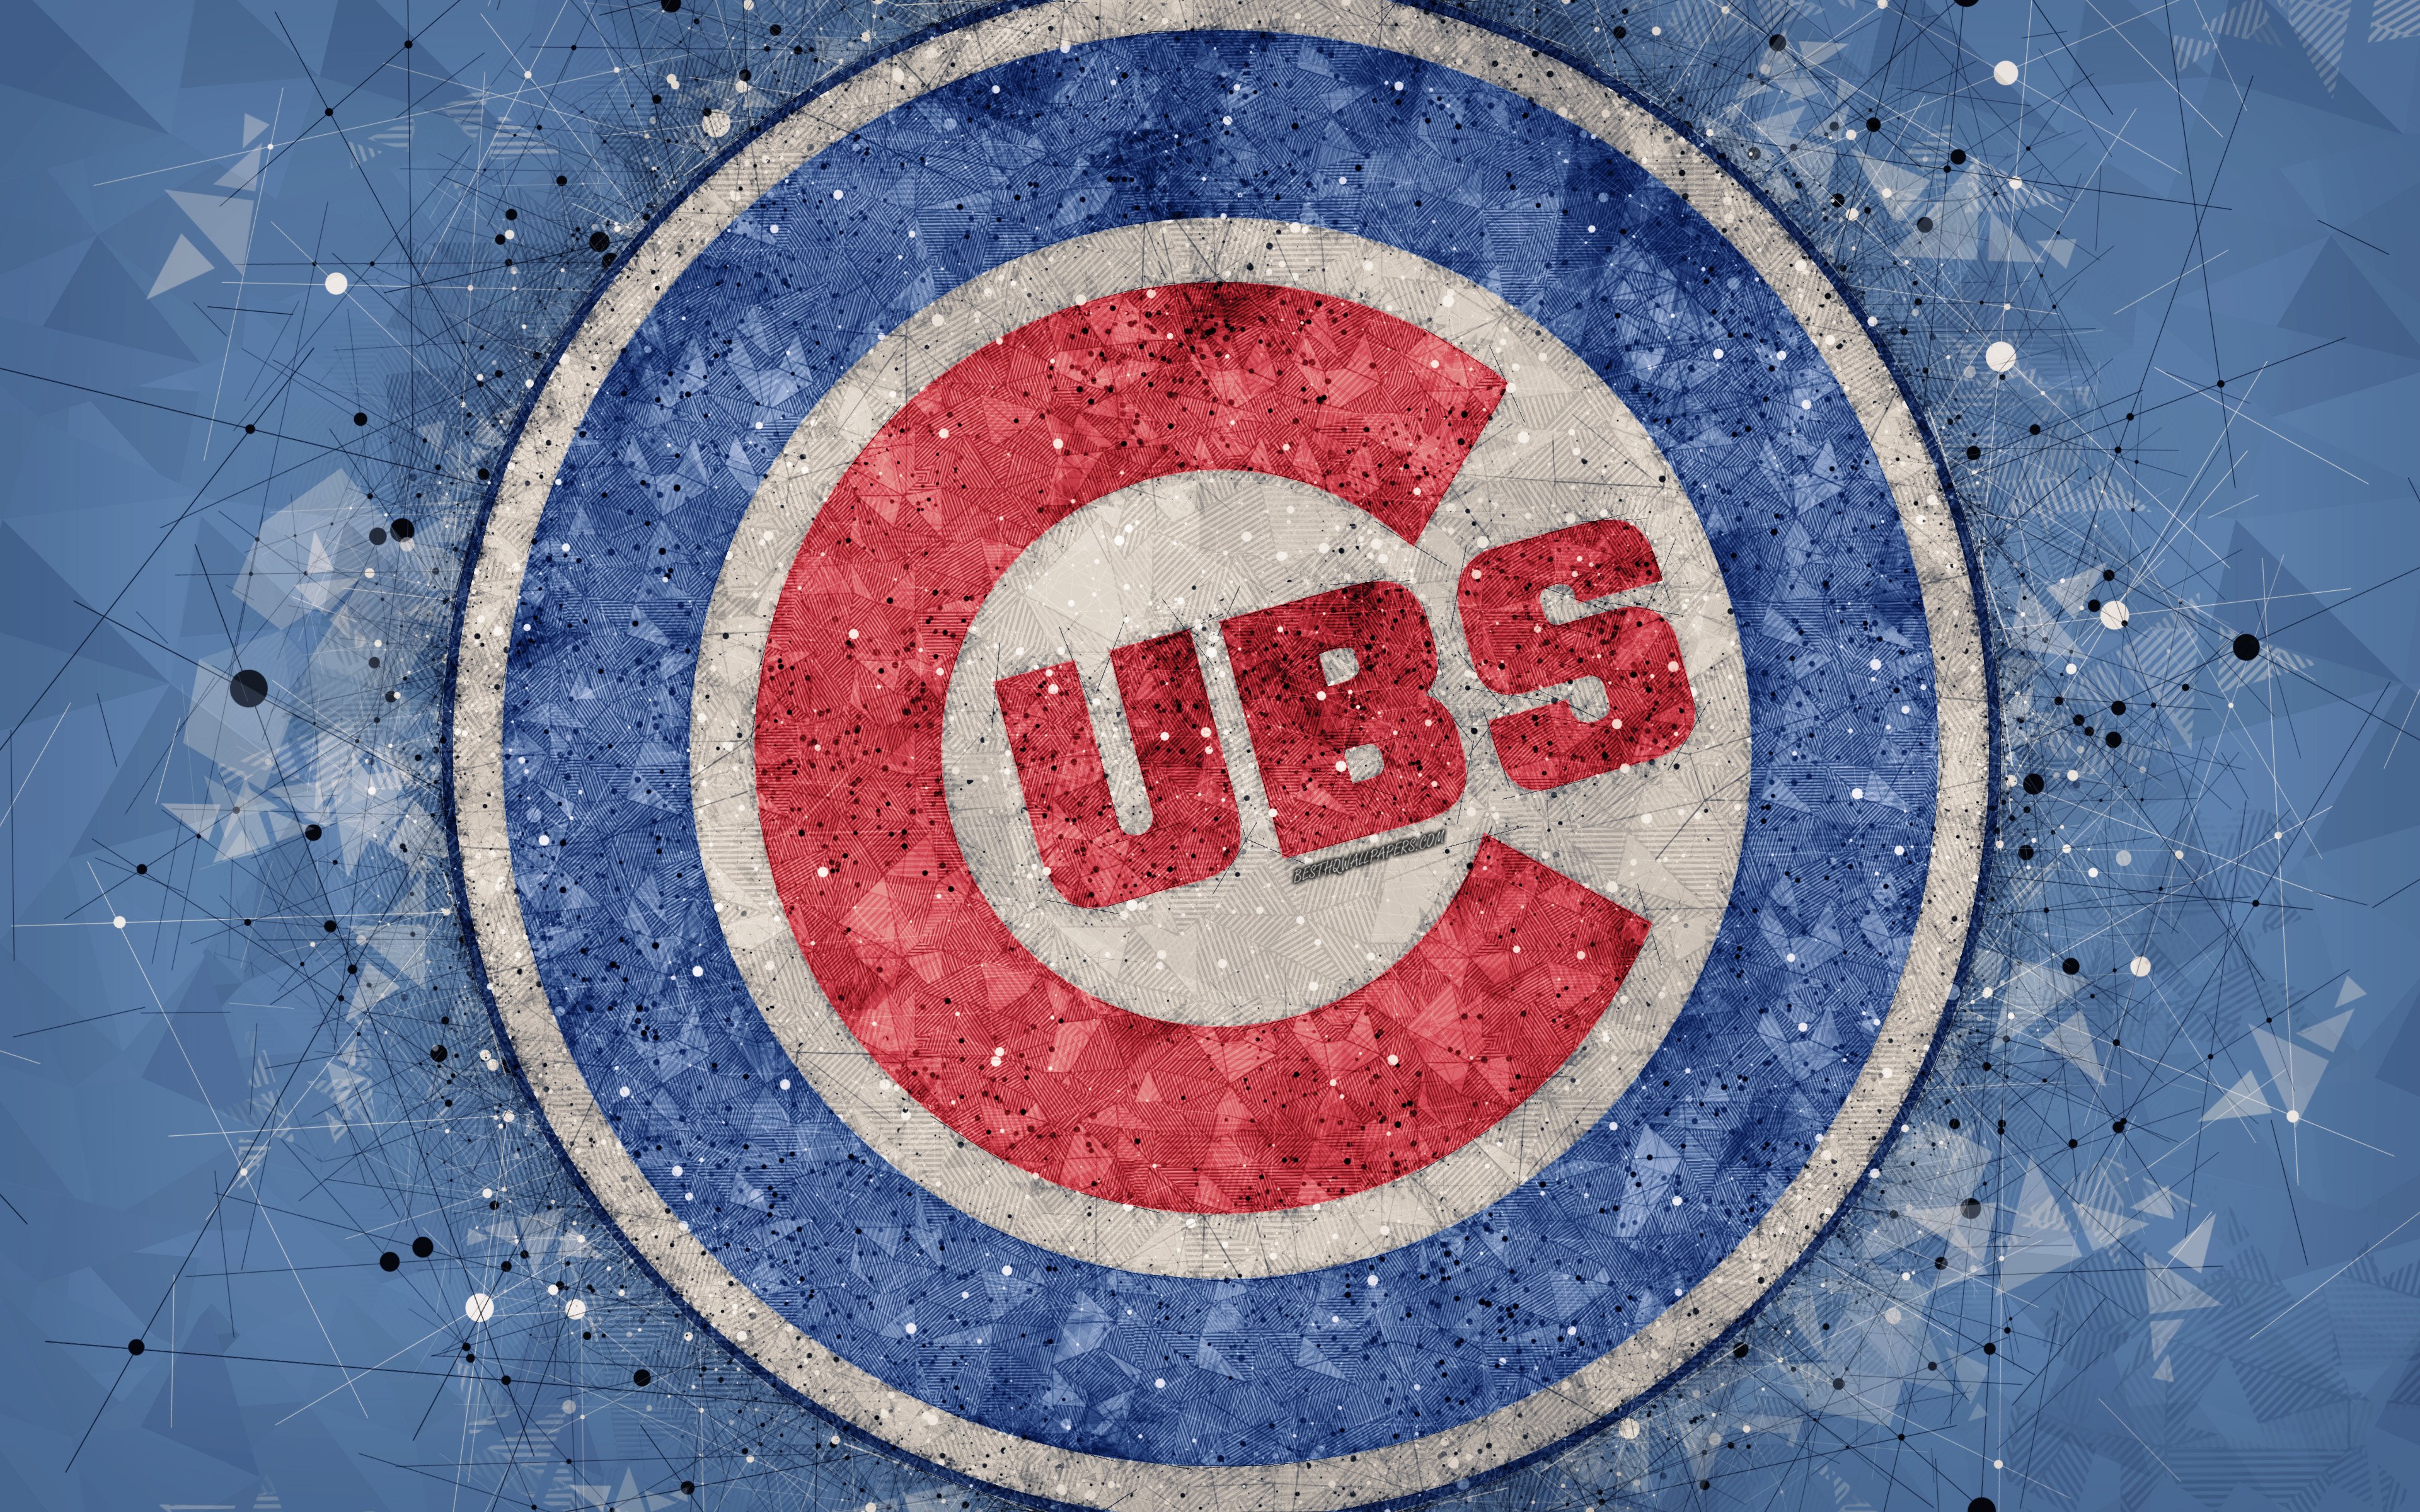 Download wallpapers Chicago Cubs, 4k, American baseball club, geometric  art, blue abstract background, National League, MLB, Chicago, Illinois,  USA, baseball, Major League Baseball for desktop with resolution 3840x2400.  High Quality HD pictures